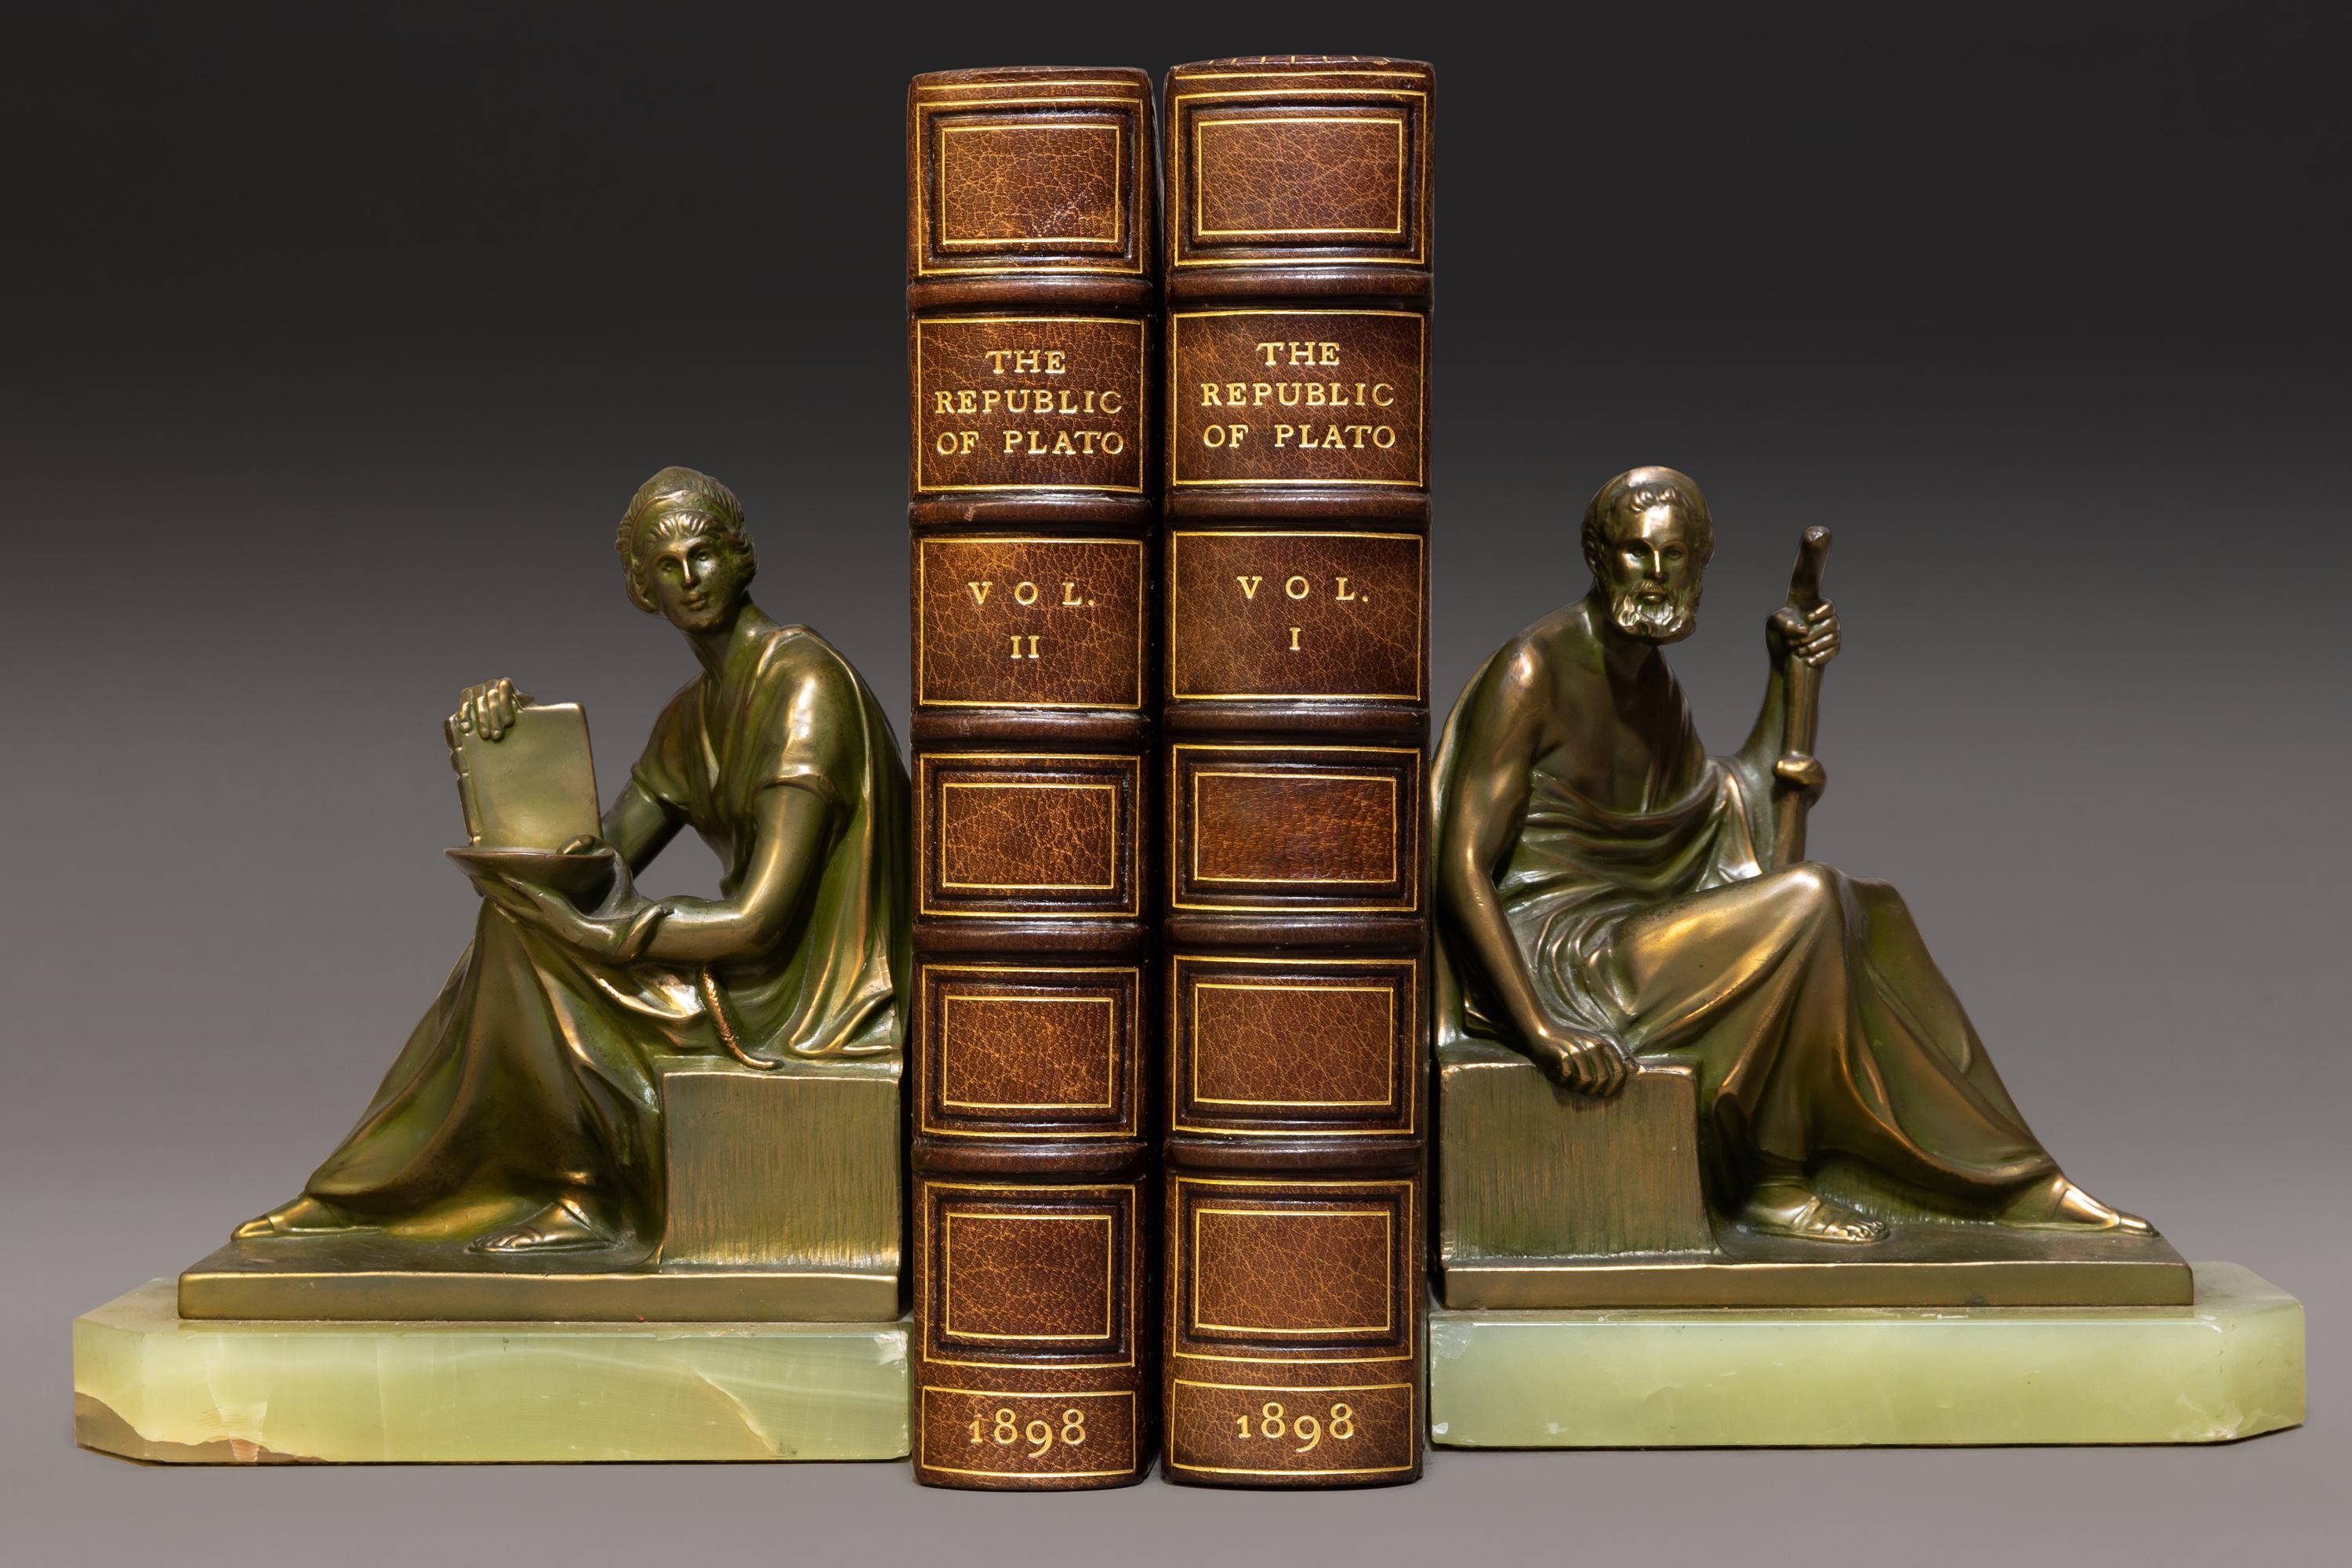 2 Volumes. Plato. The Republic. Printed from the Translation of John Llewlyn Davies & David James Vaughan. Bound in full green morocco. Ornate gilt detailing on spines and covers, raised bands, all edges gilt, inner dentelles. 
Published: London: